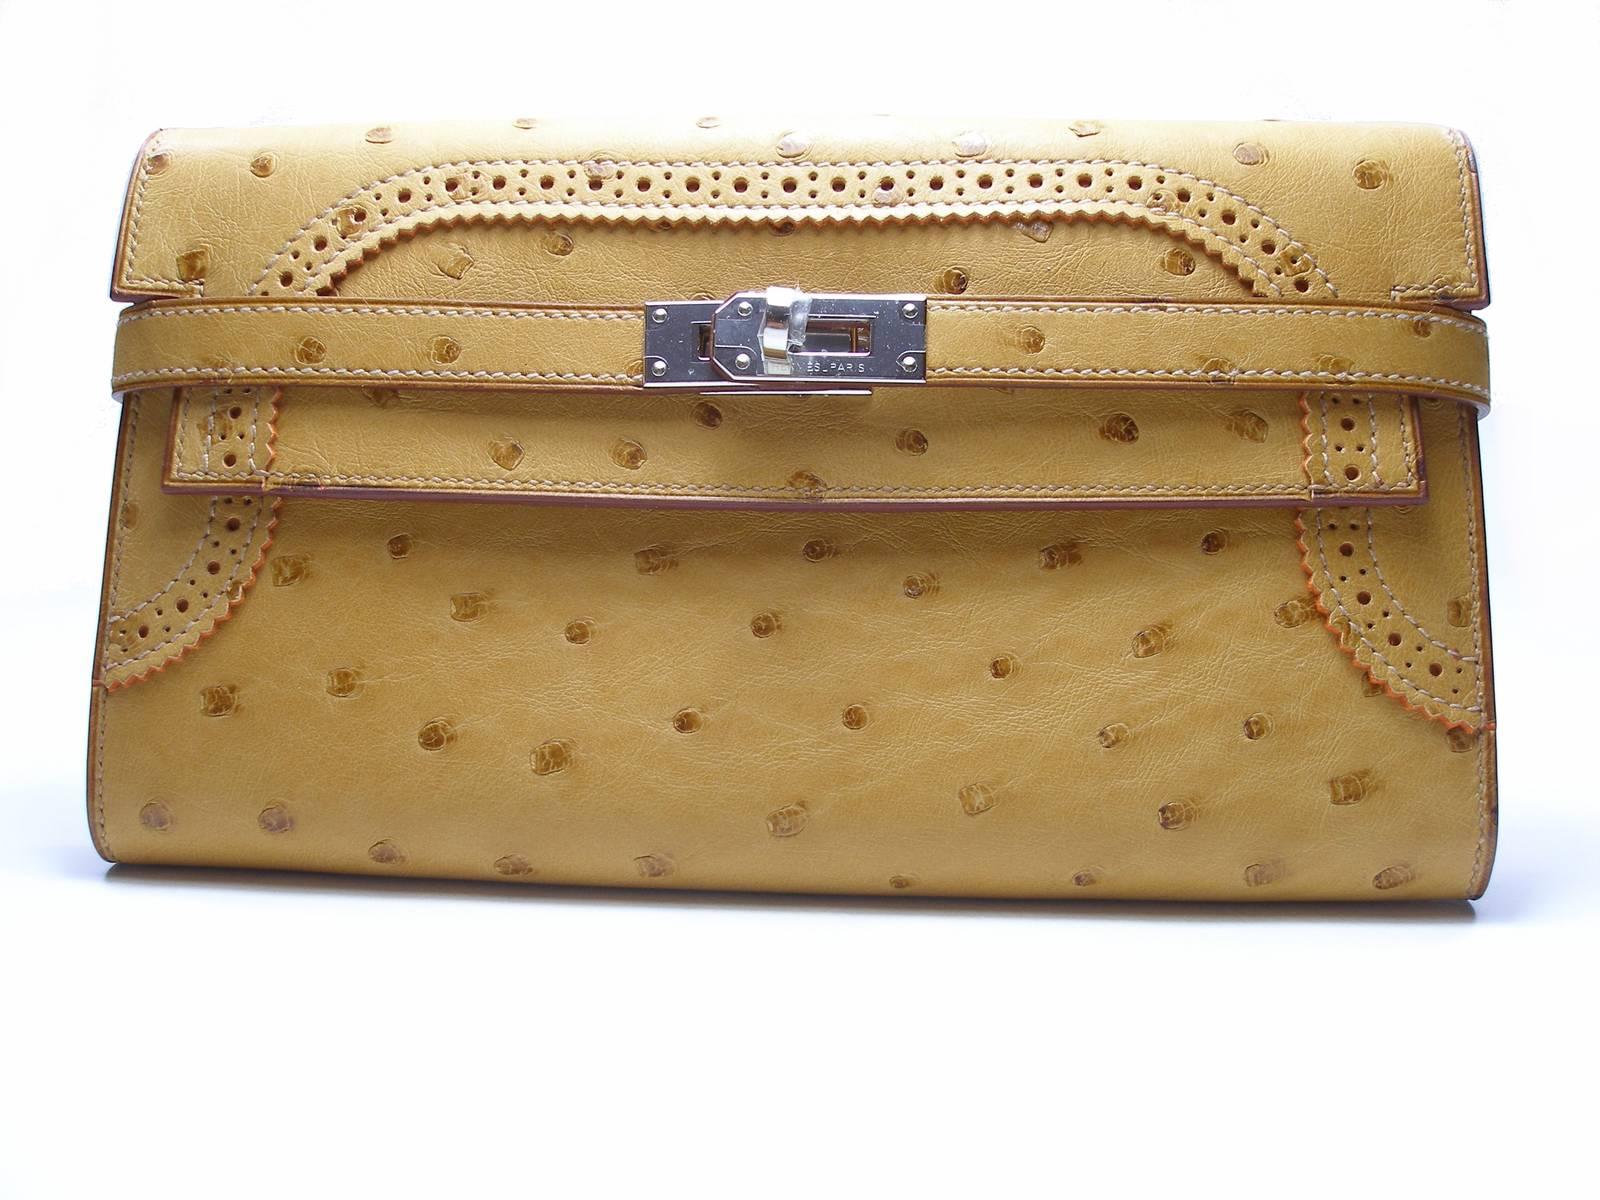 FANTASTIC ...GREAT as an Evening Clutch !
Hermès Kelly Gillies 
Autruche Leather 
Color : Tabac / Camel 
Palladium hardware , signed Hermès Paris
Note : plastic protection is still on hdw 
Measures 4.5